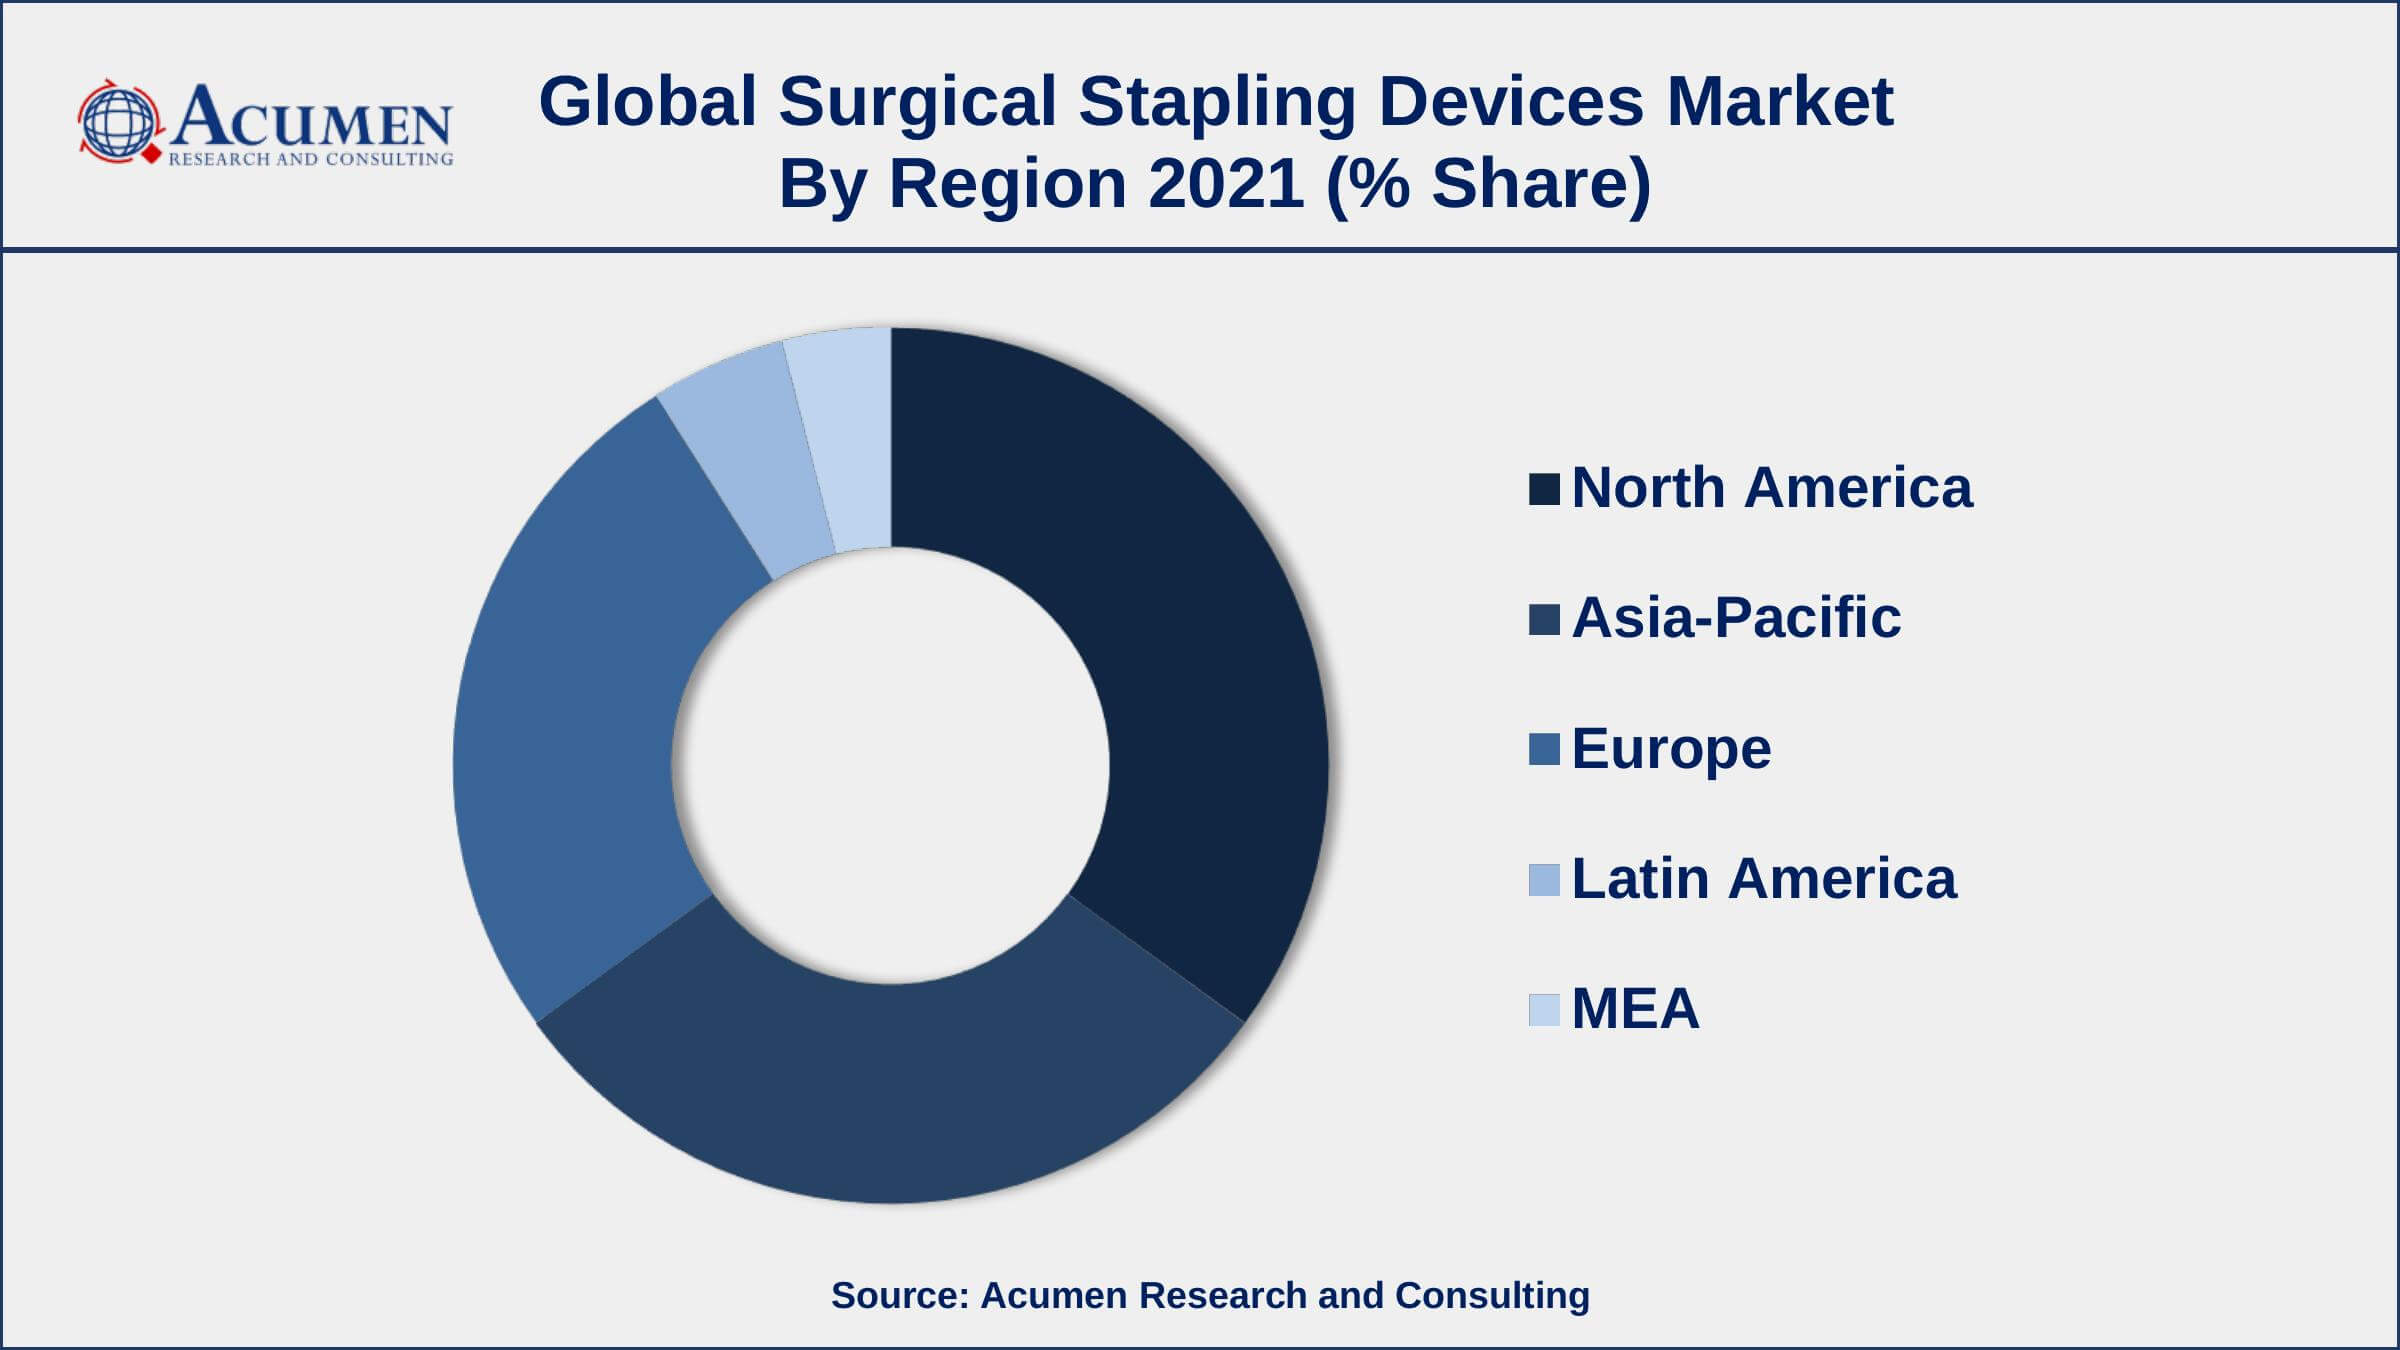 Increasing demand for minimally invasive surgery, drives the surgical stapling devices market size